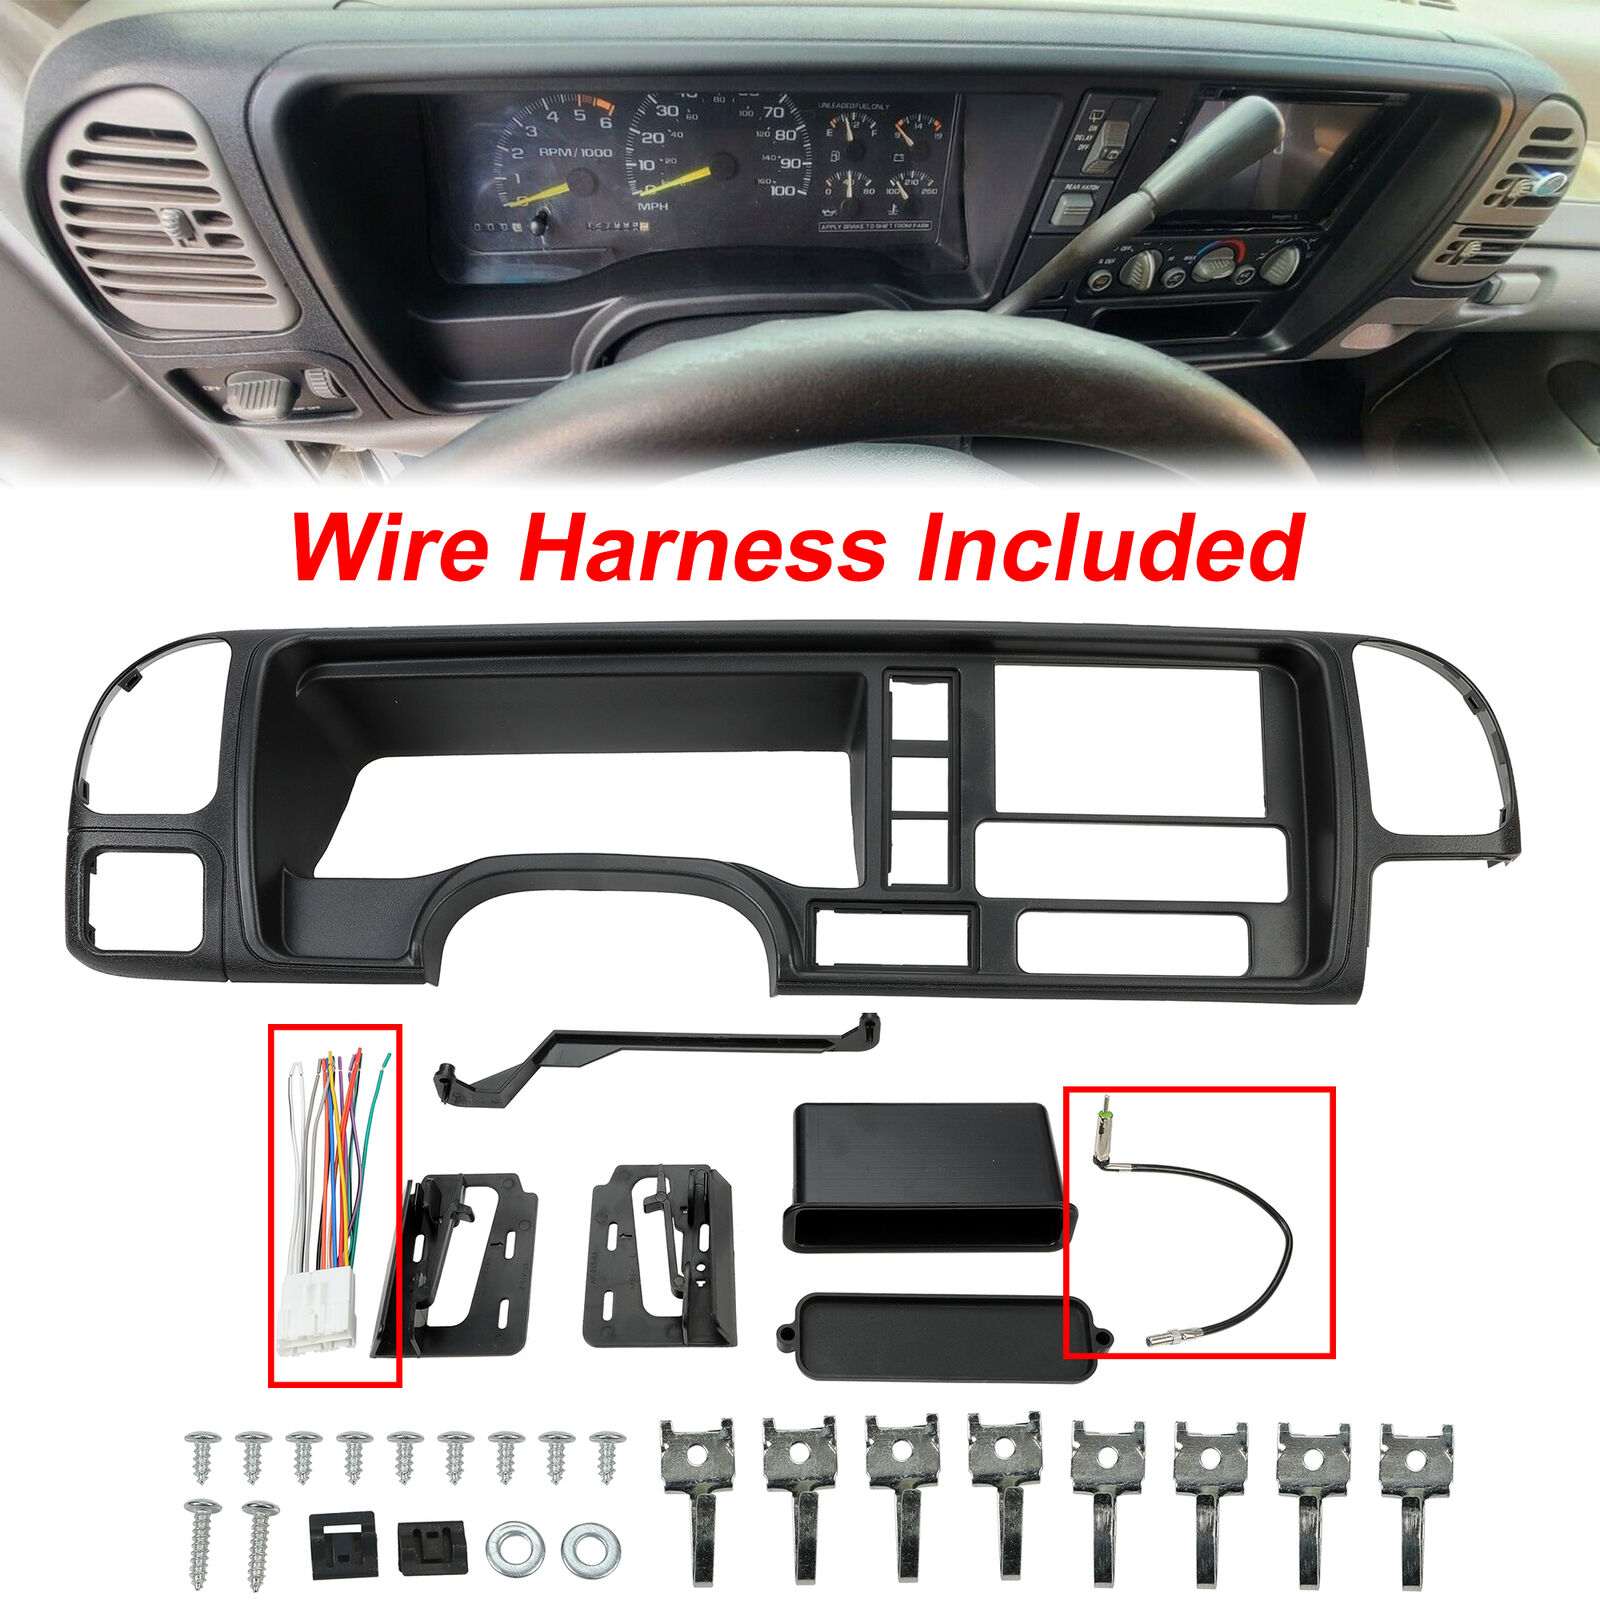 FOR 1995-02 GMC Truck SUV Radio Stereo Double Din Dash Kit Panel Wire  Harness